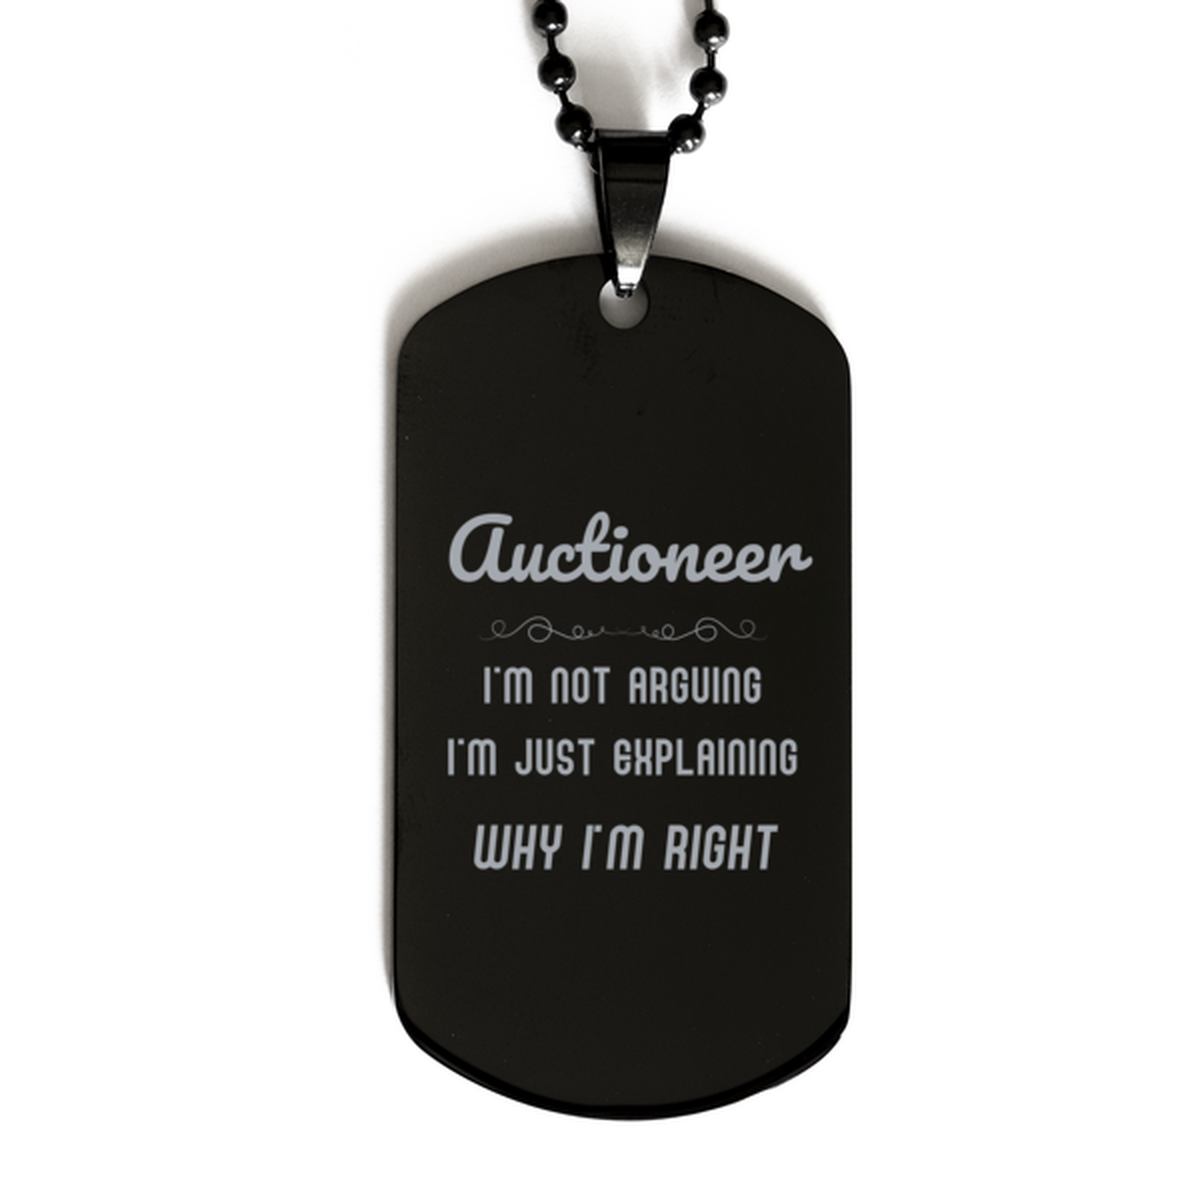 Auctioneer I'm not Arguing. I'm Just Explaining Why I'm RIGHT Black Dog Tag, Funny Saying Quote Auctioneer Gifts For Auctioneer Graduation Birthday Christmas Gifts for Men Women Coworker